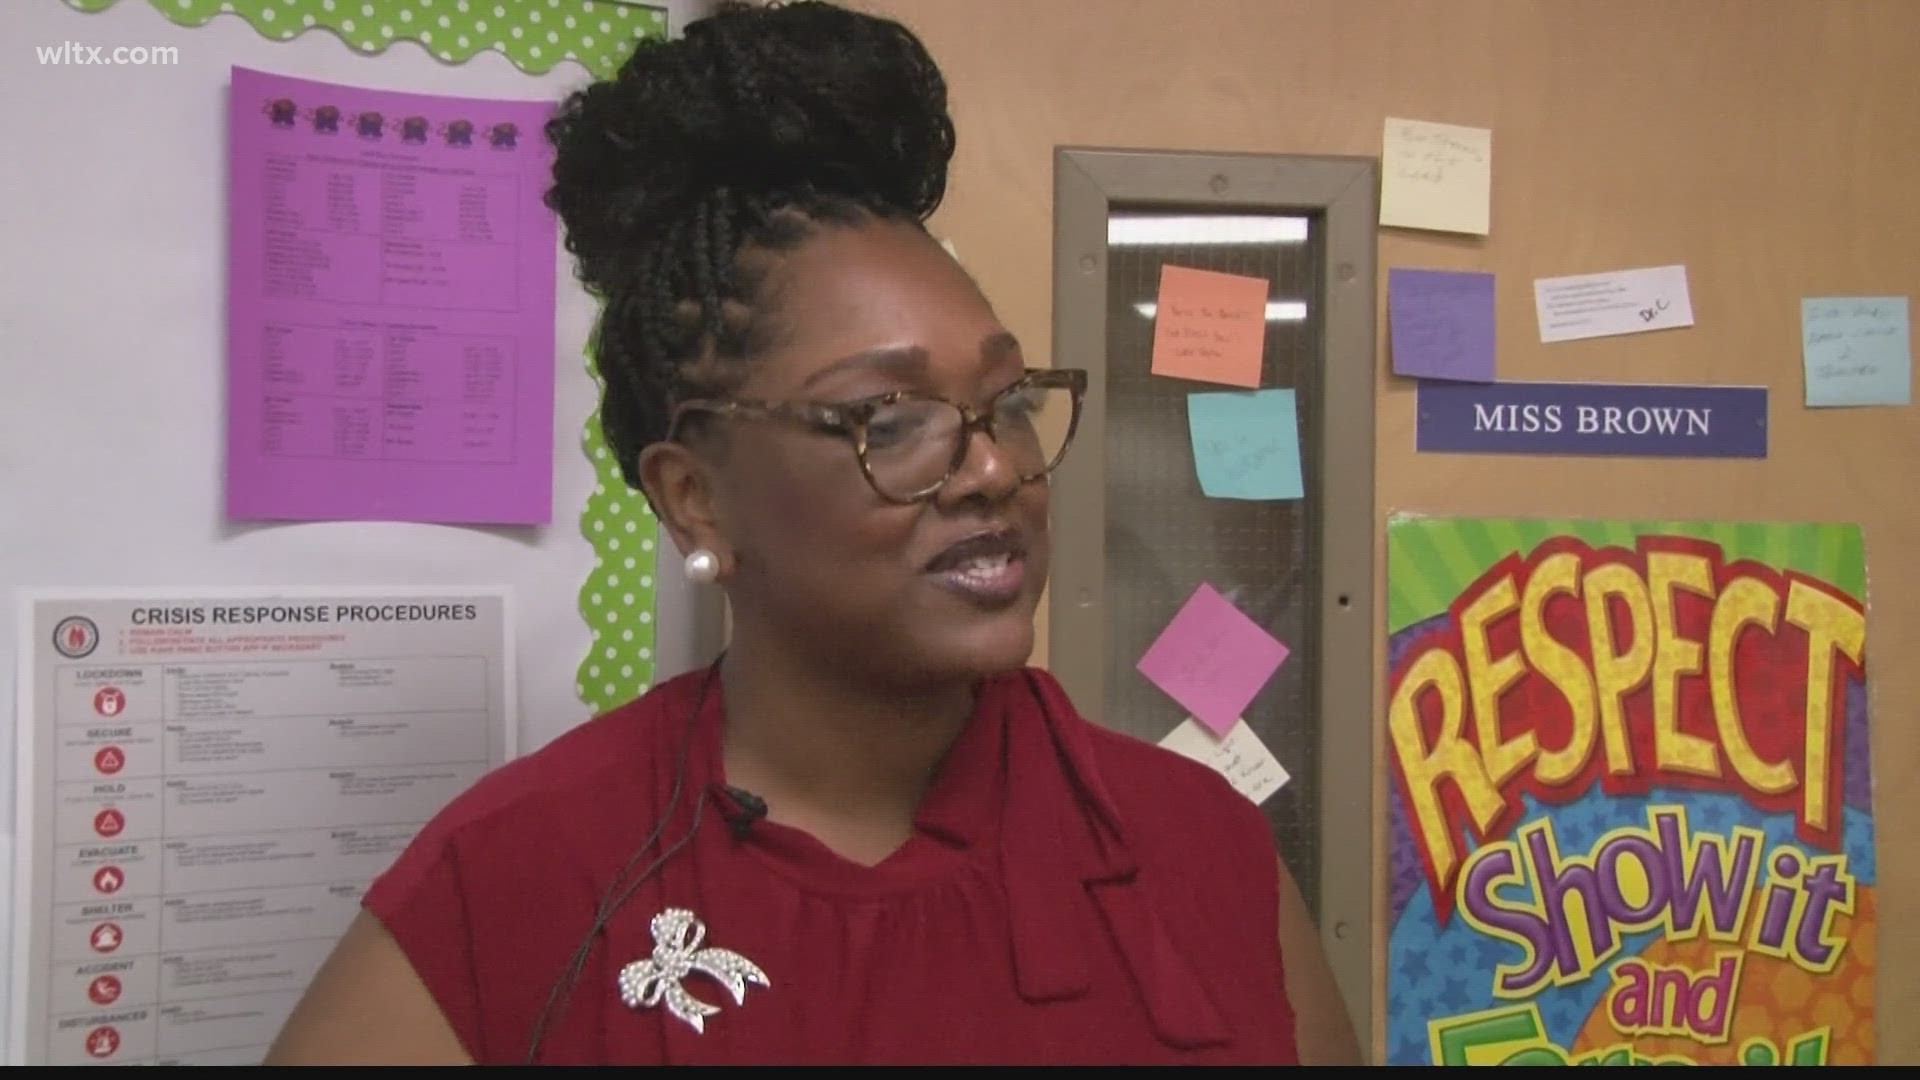 Newberry Middle School's Jennifer Brown teachers, runs after school programs and cheers students on the sidelines-she is this weeks WLTX Teacher of the Week.